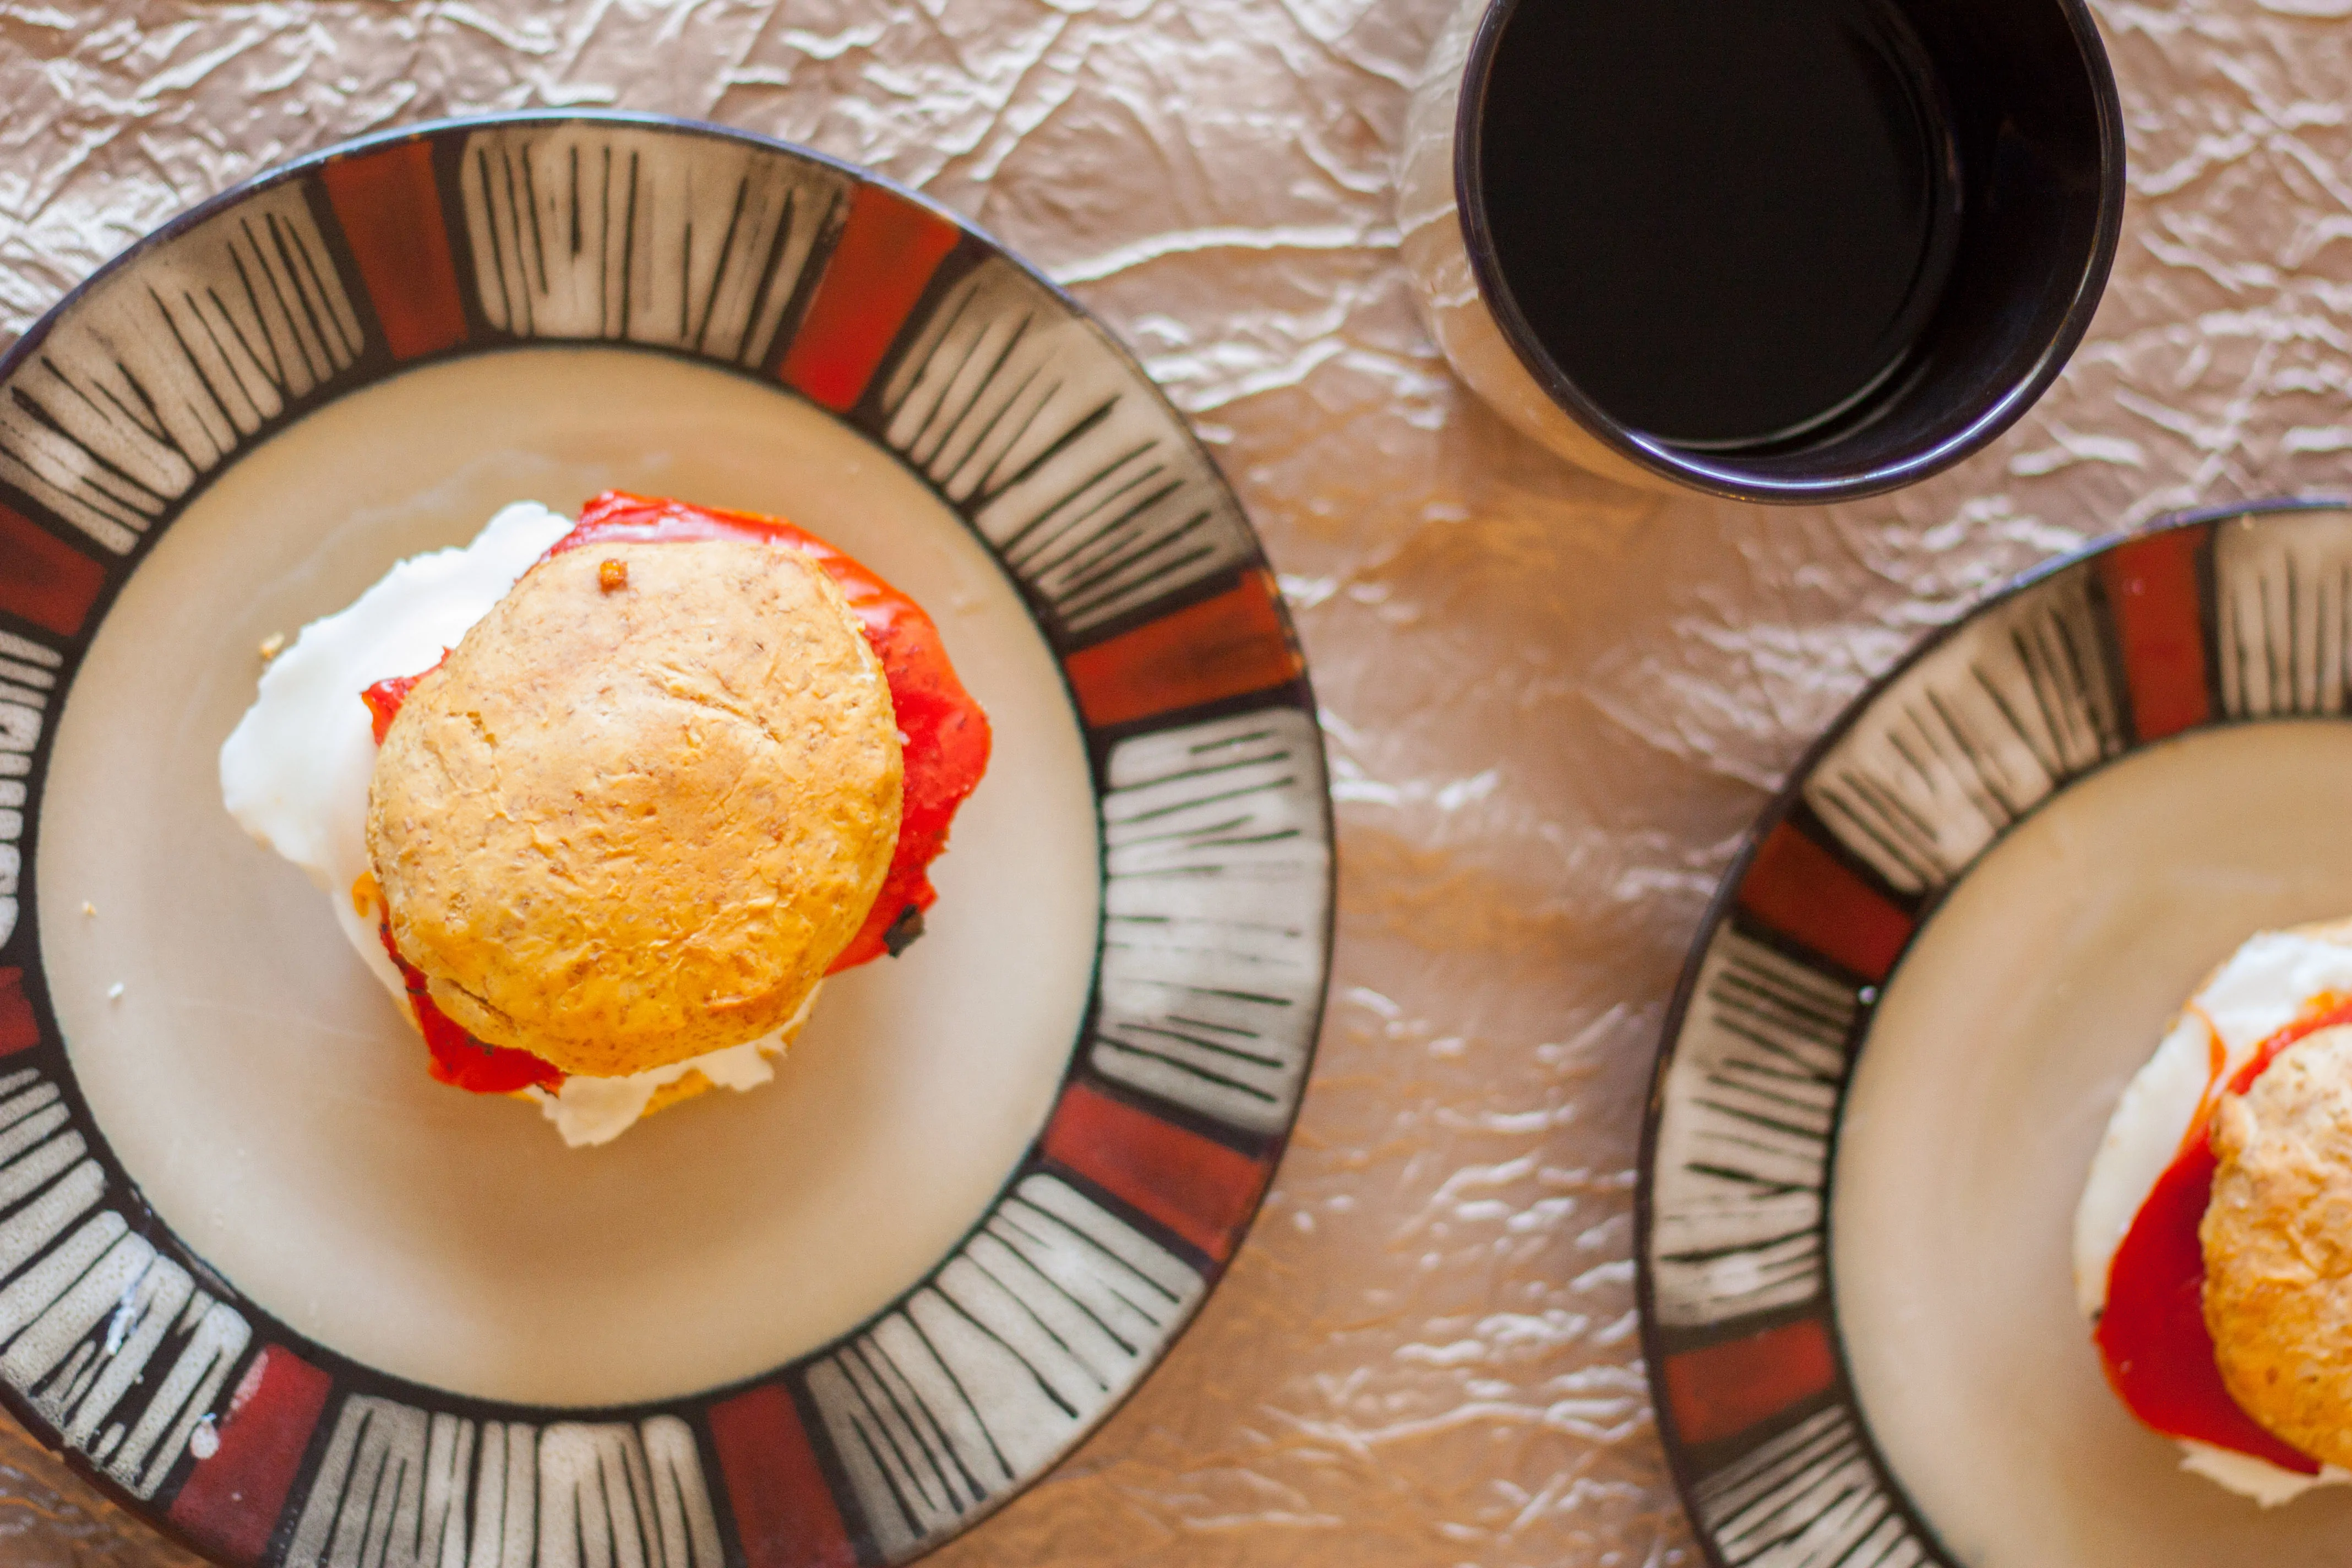 Roasted Red Pepper and Goat Cheese Egg Sandwich